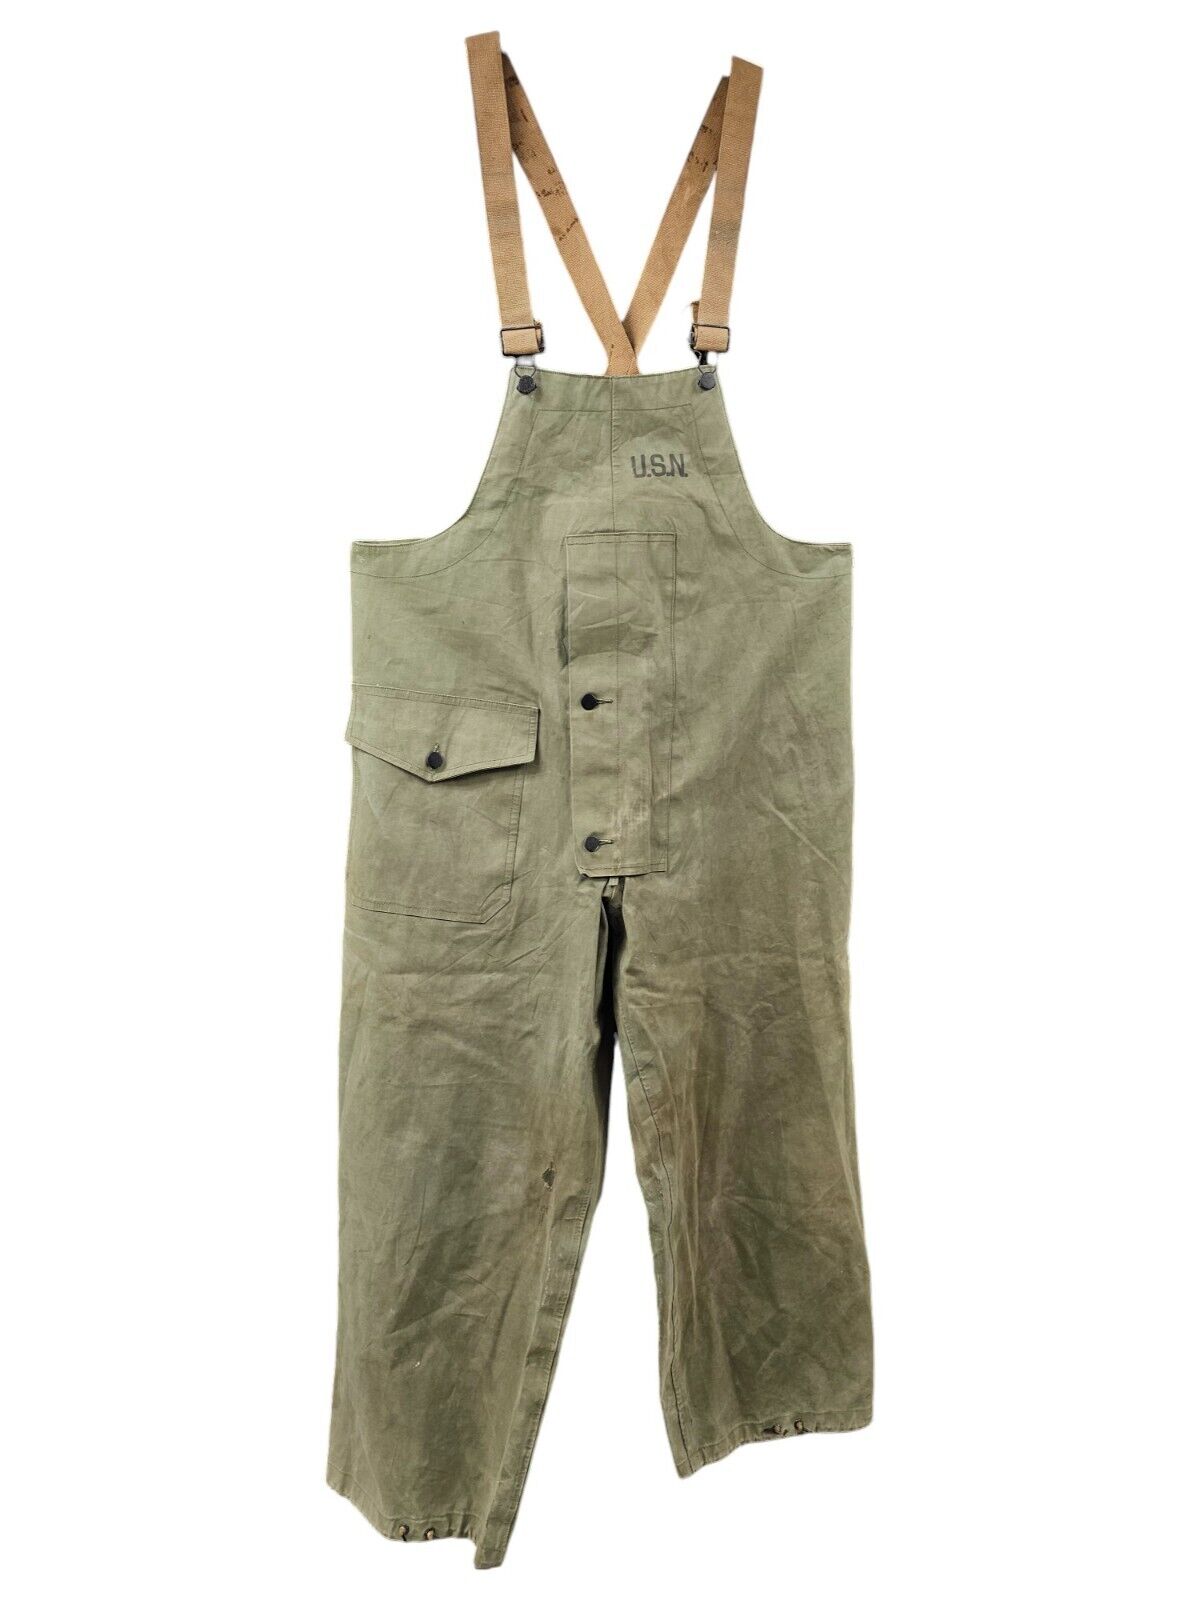 WW2 U.S. Armed Forces Navy Deck Overalls